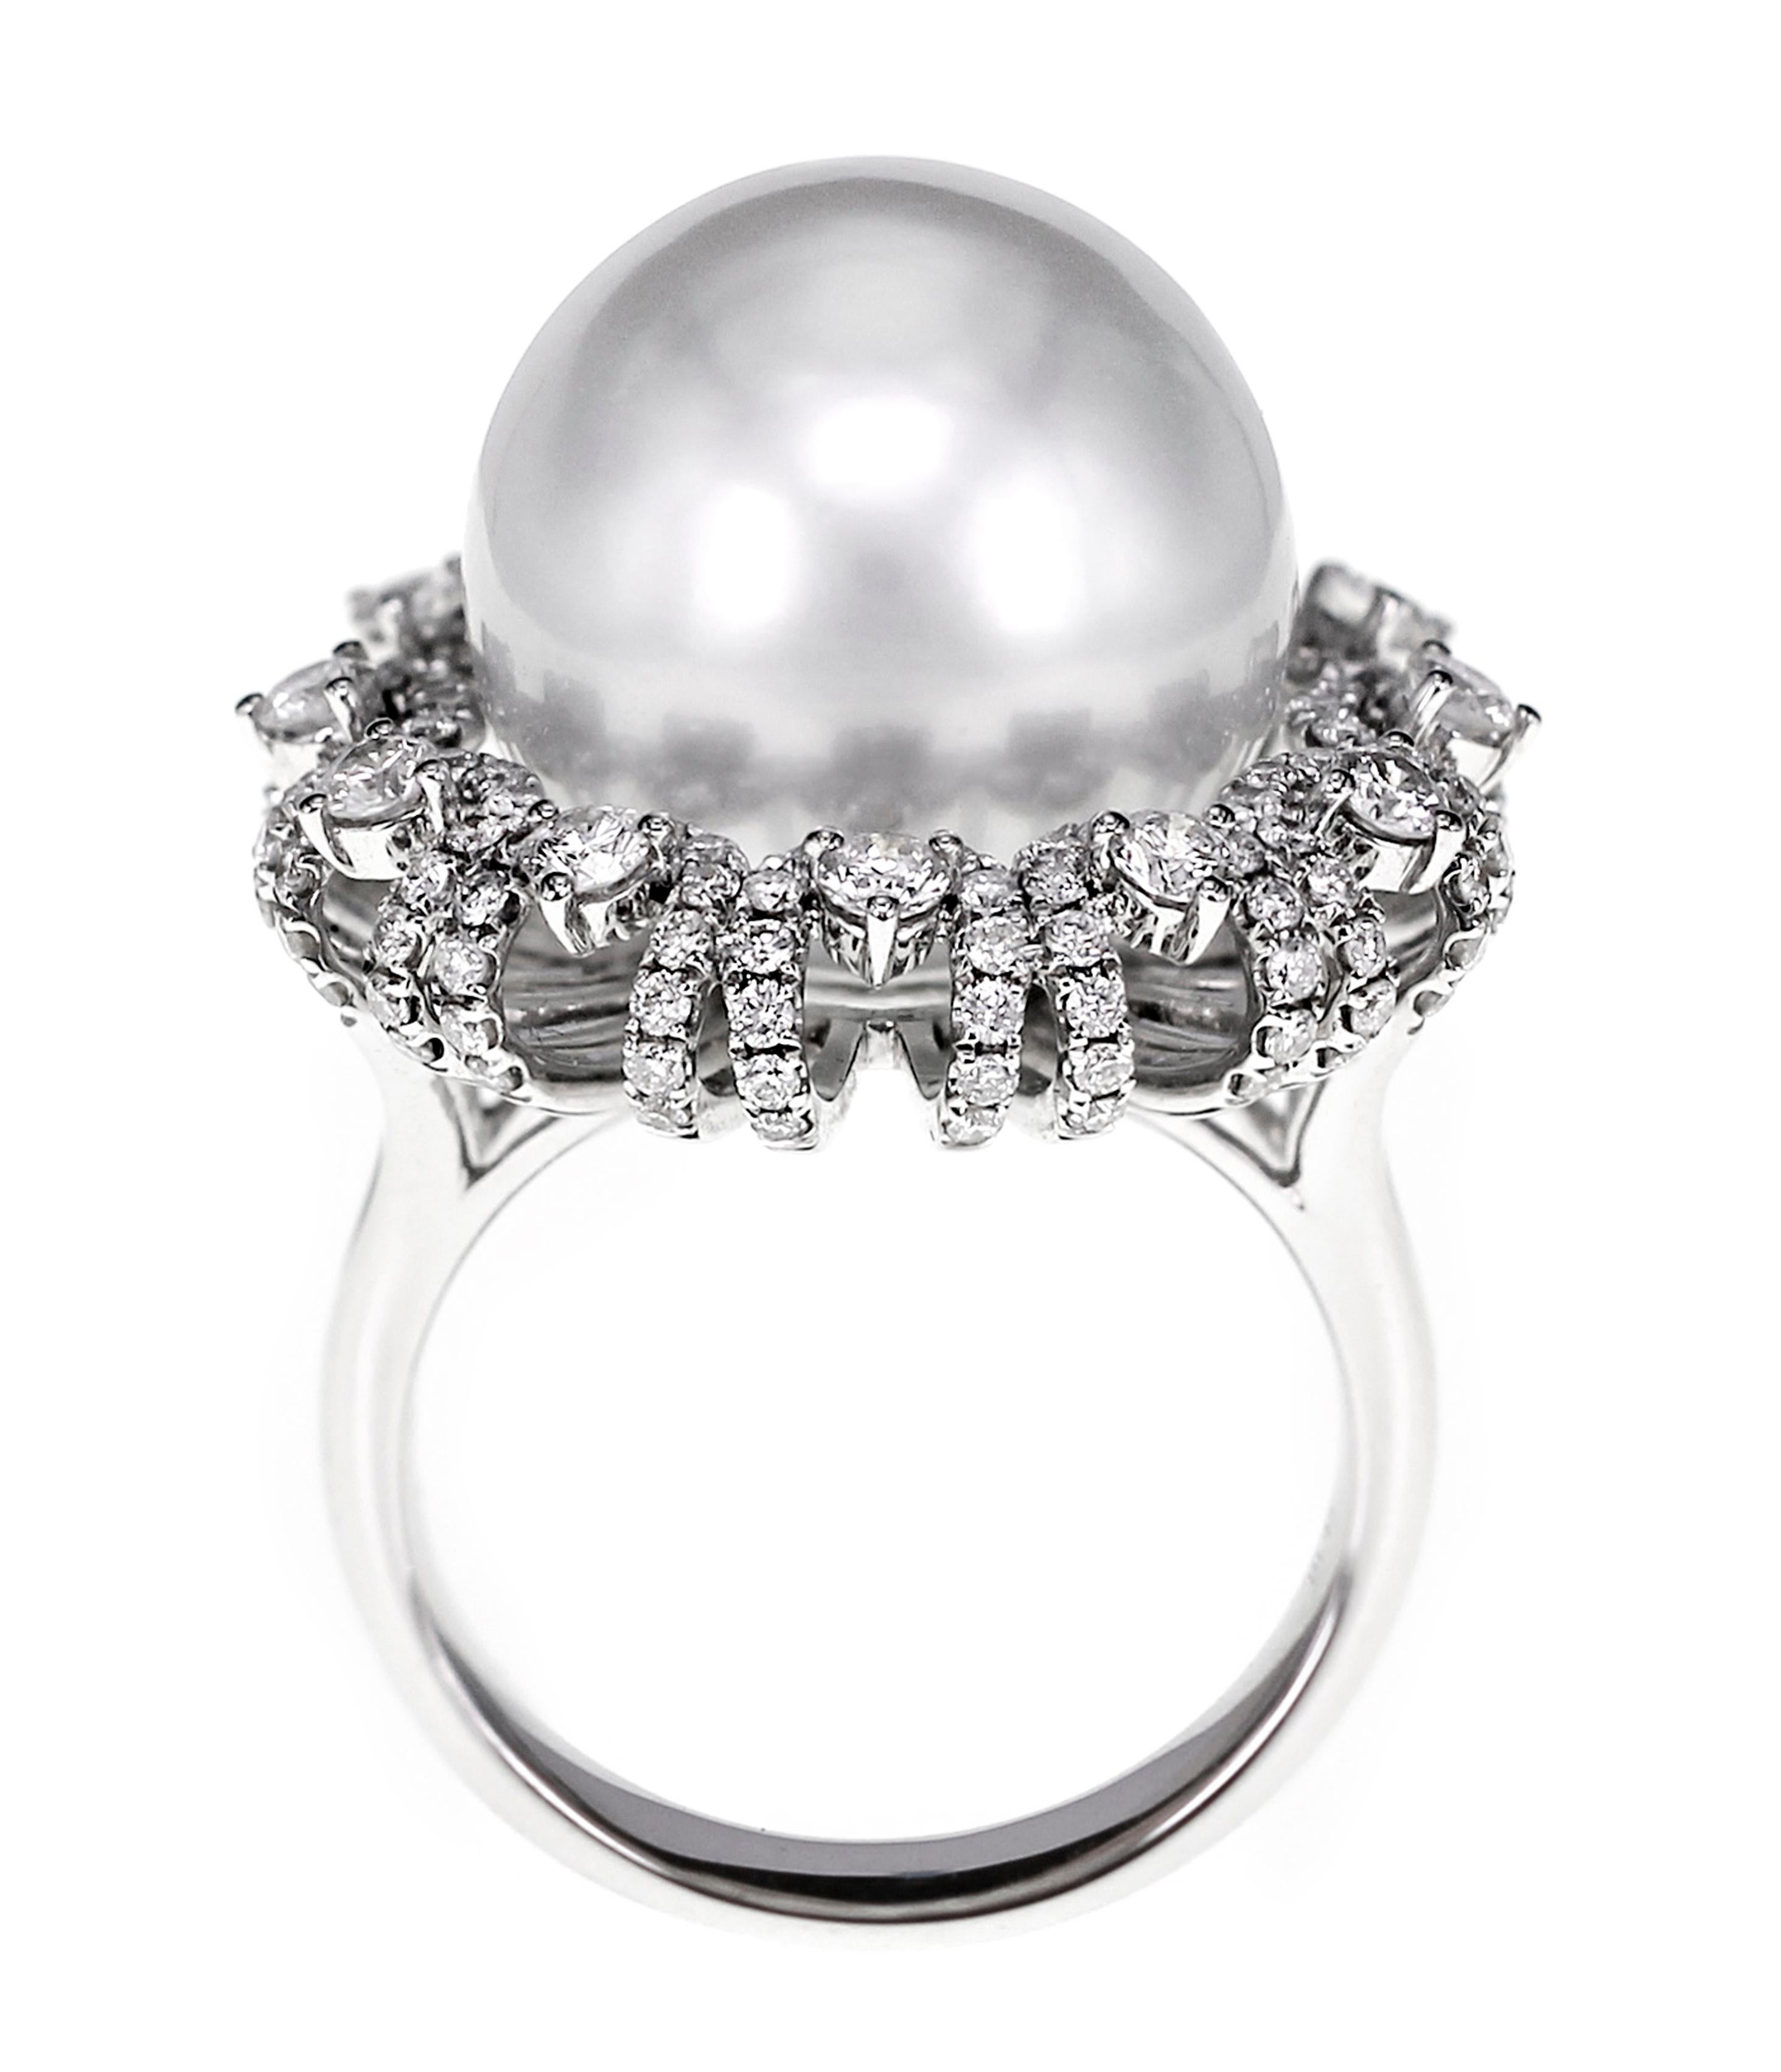 Art Nouveau 25.00 Carat Smooth Pearl and Diamond Cocktail Solitaire Ring